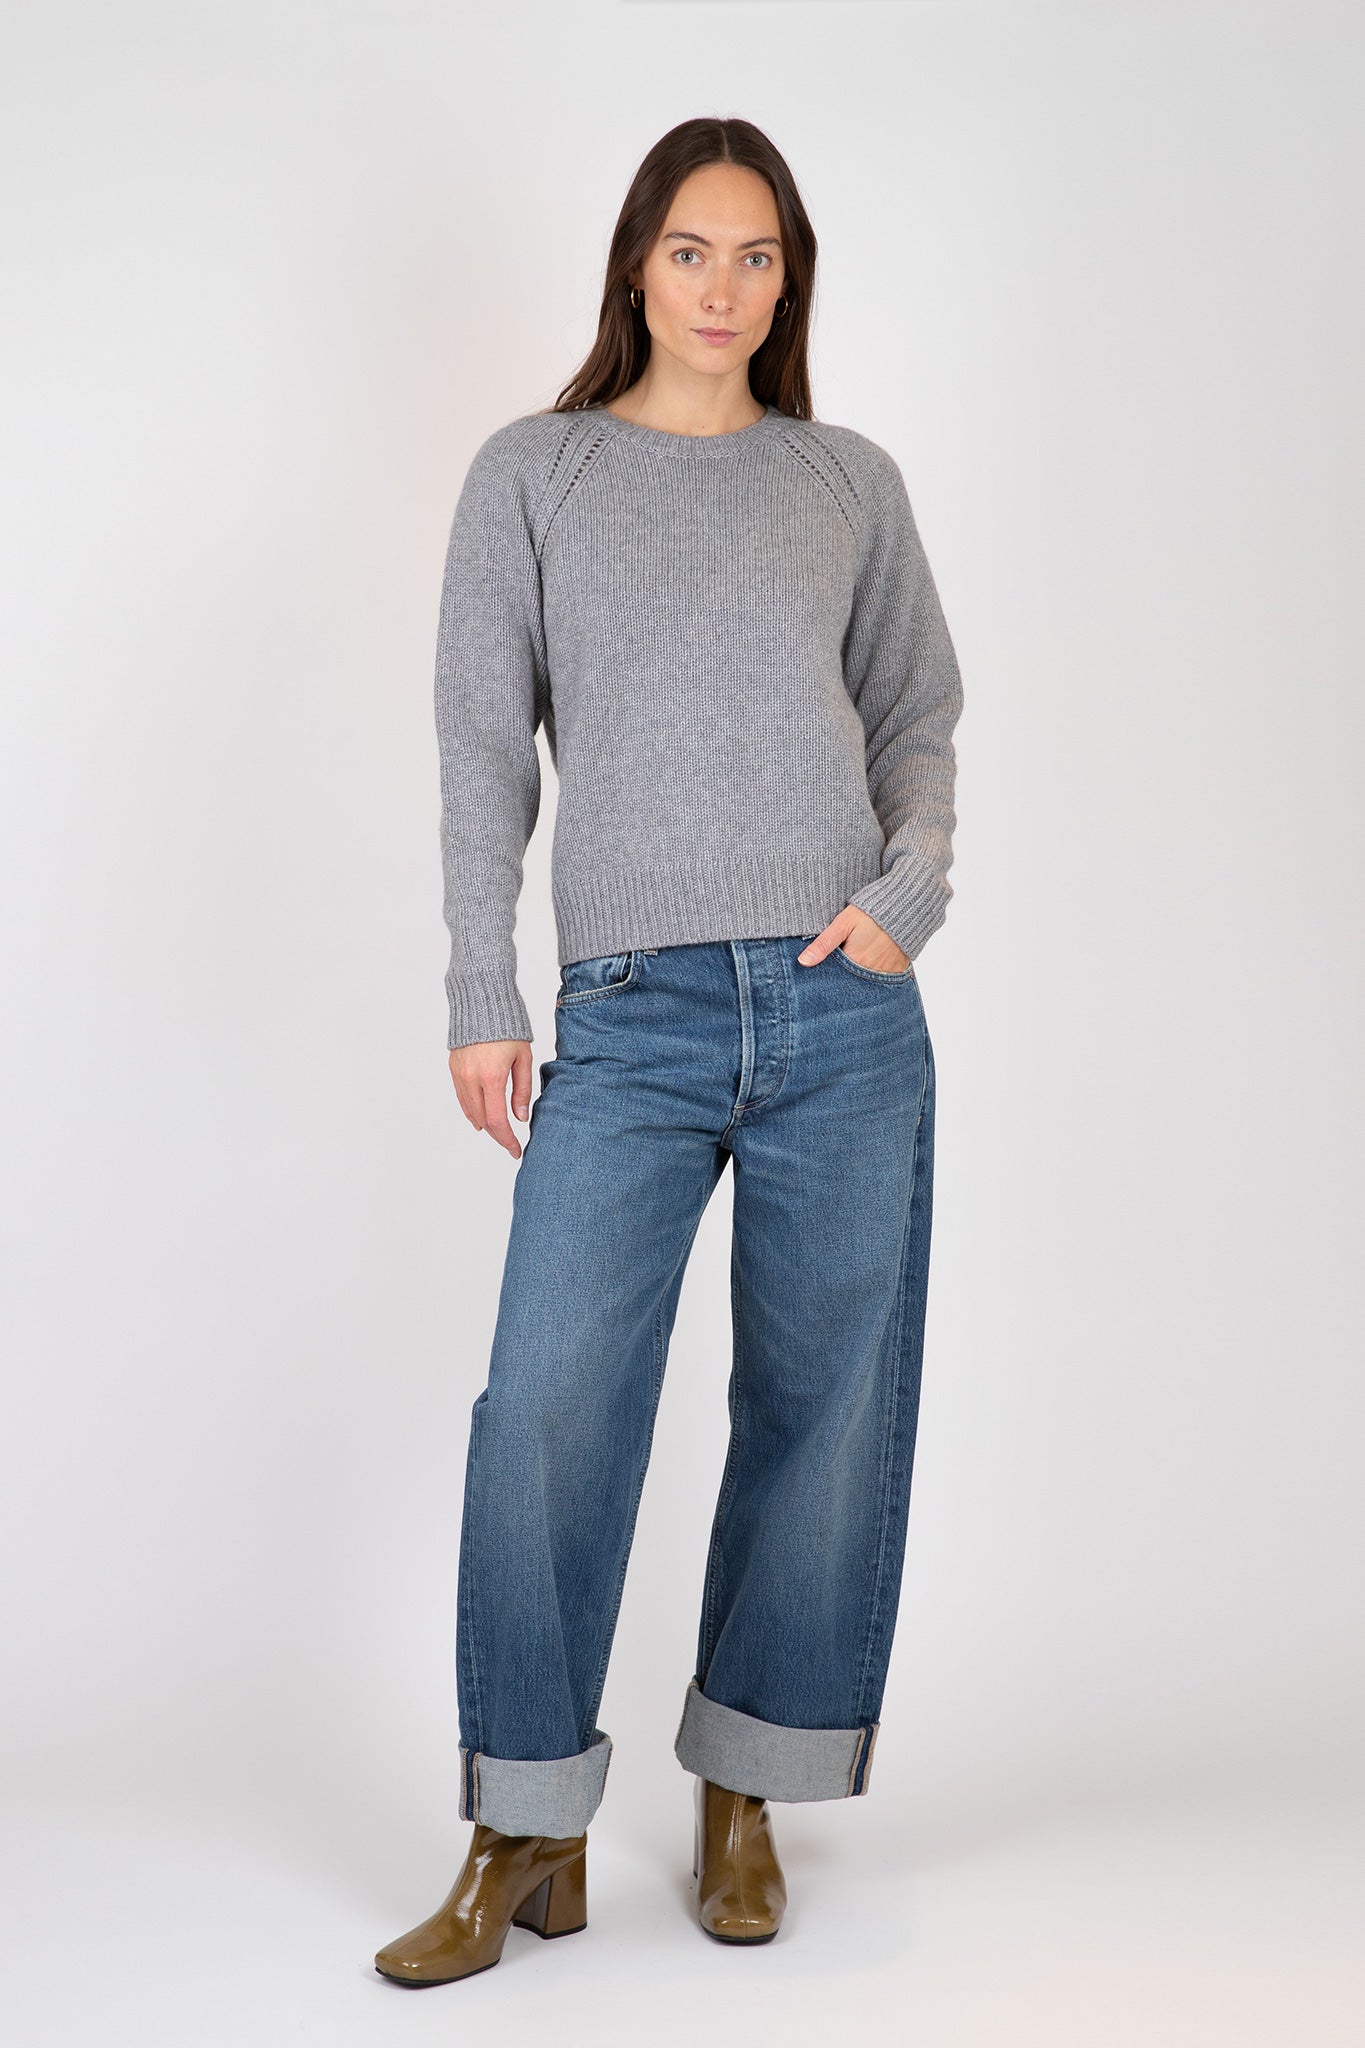 Relaxed Open Raglan Crew Sweaters & Knits Autumn Cashmere   